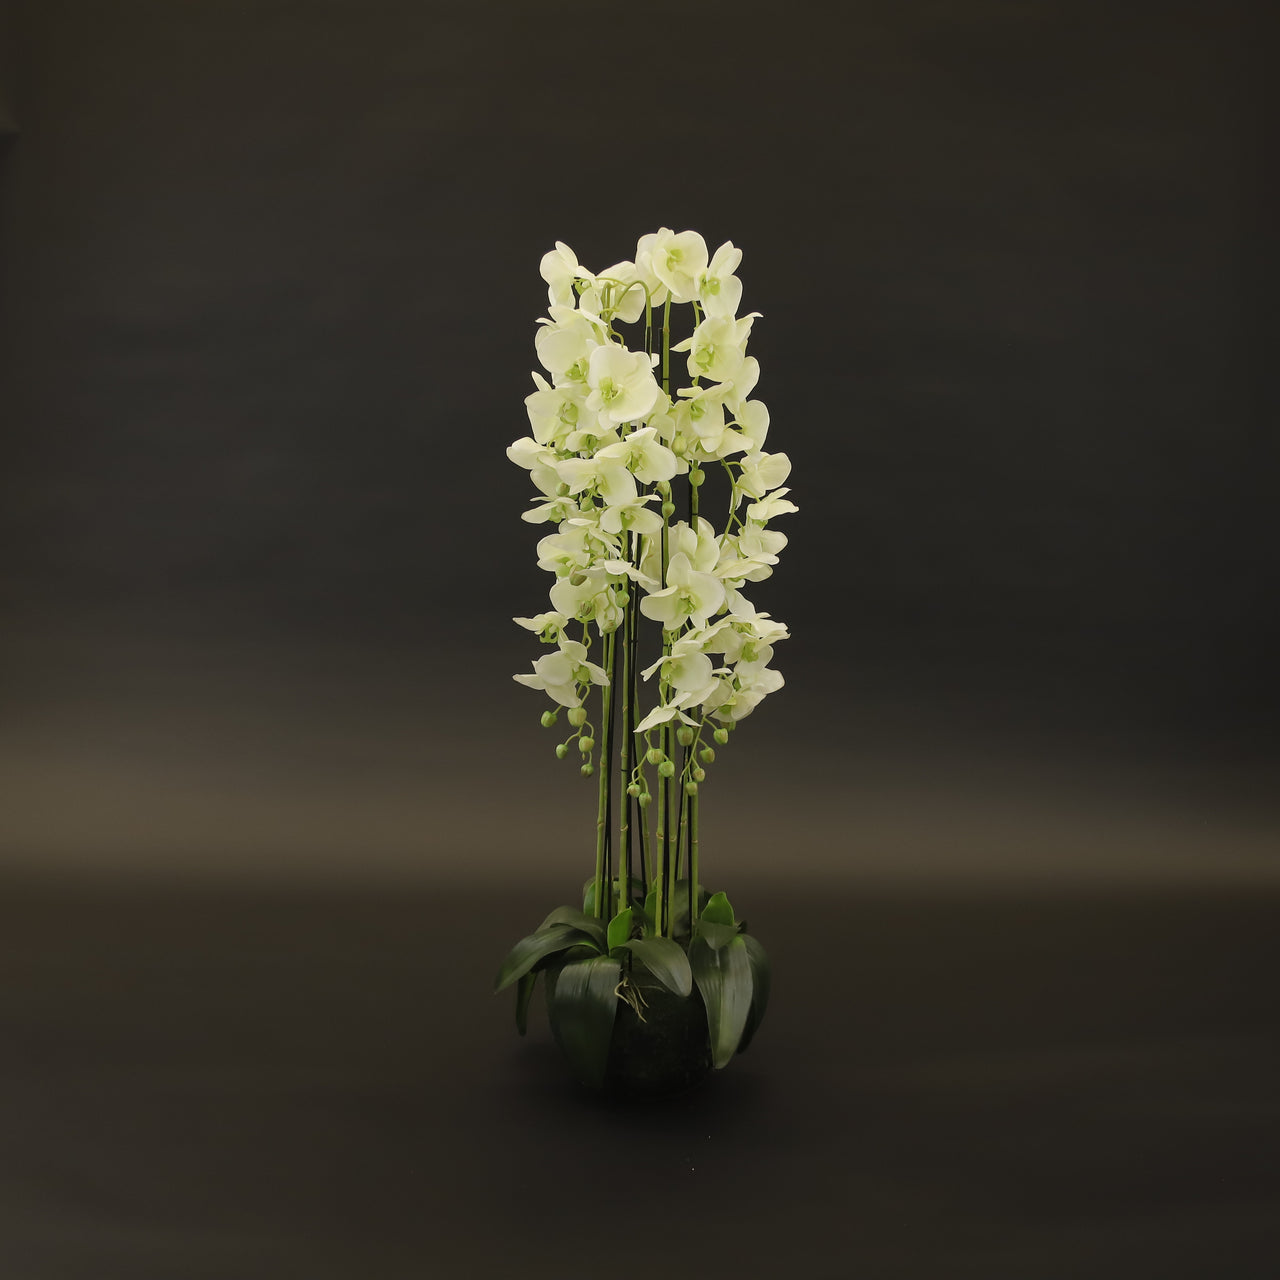 HCFL9624 - Green Orchid Plant